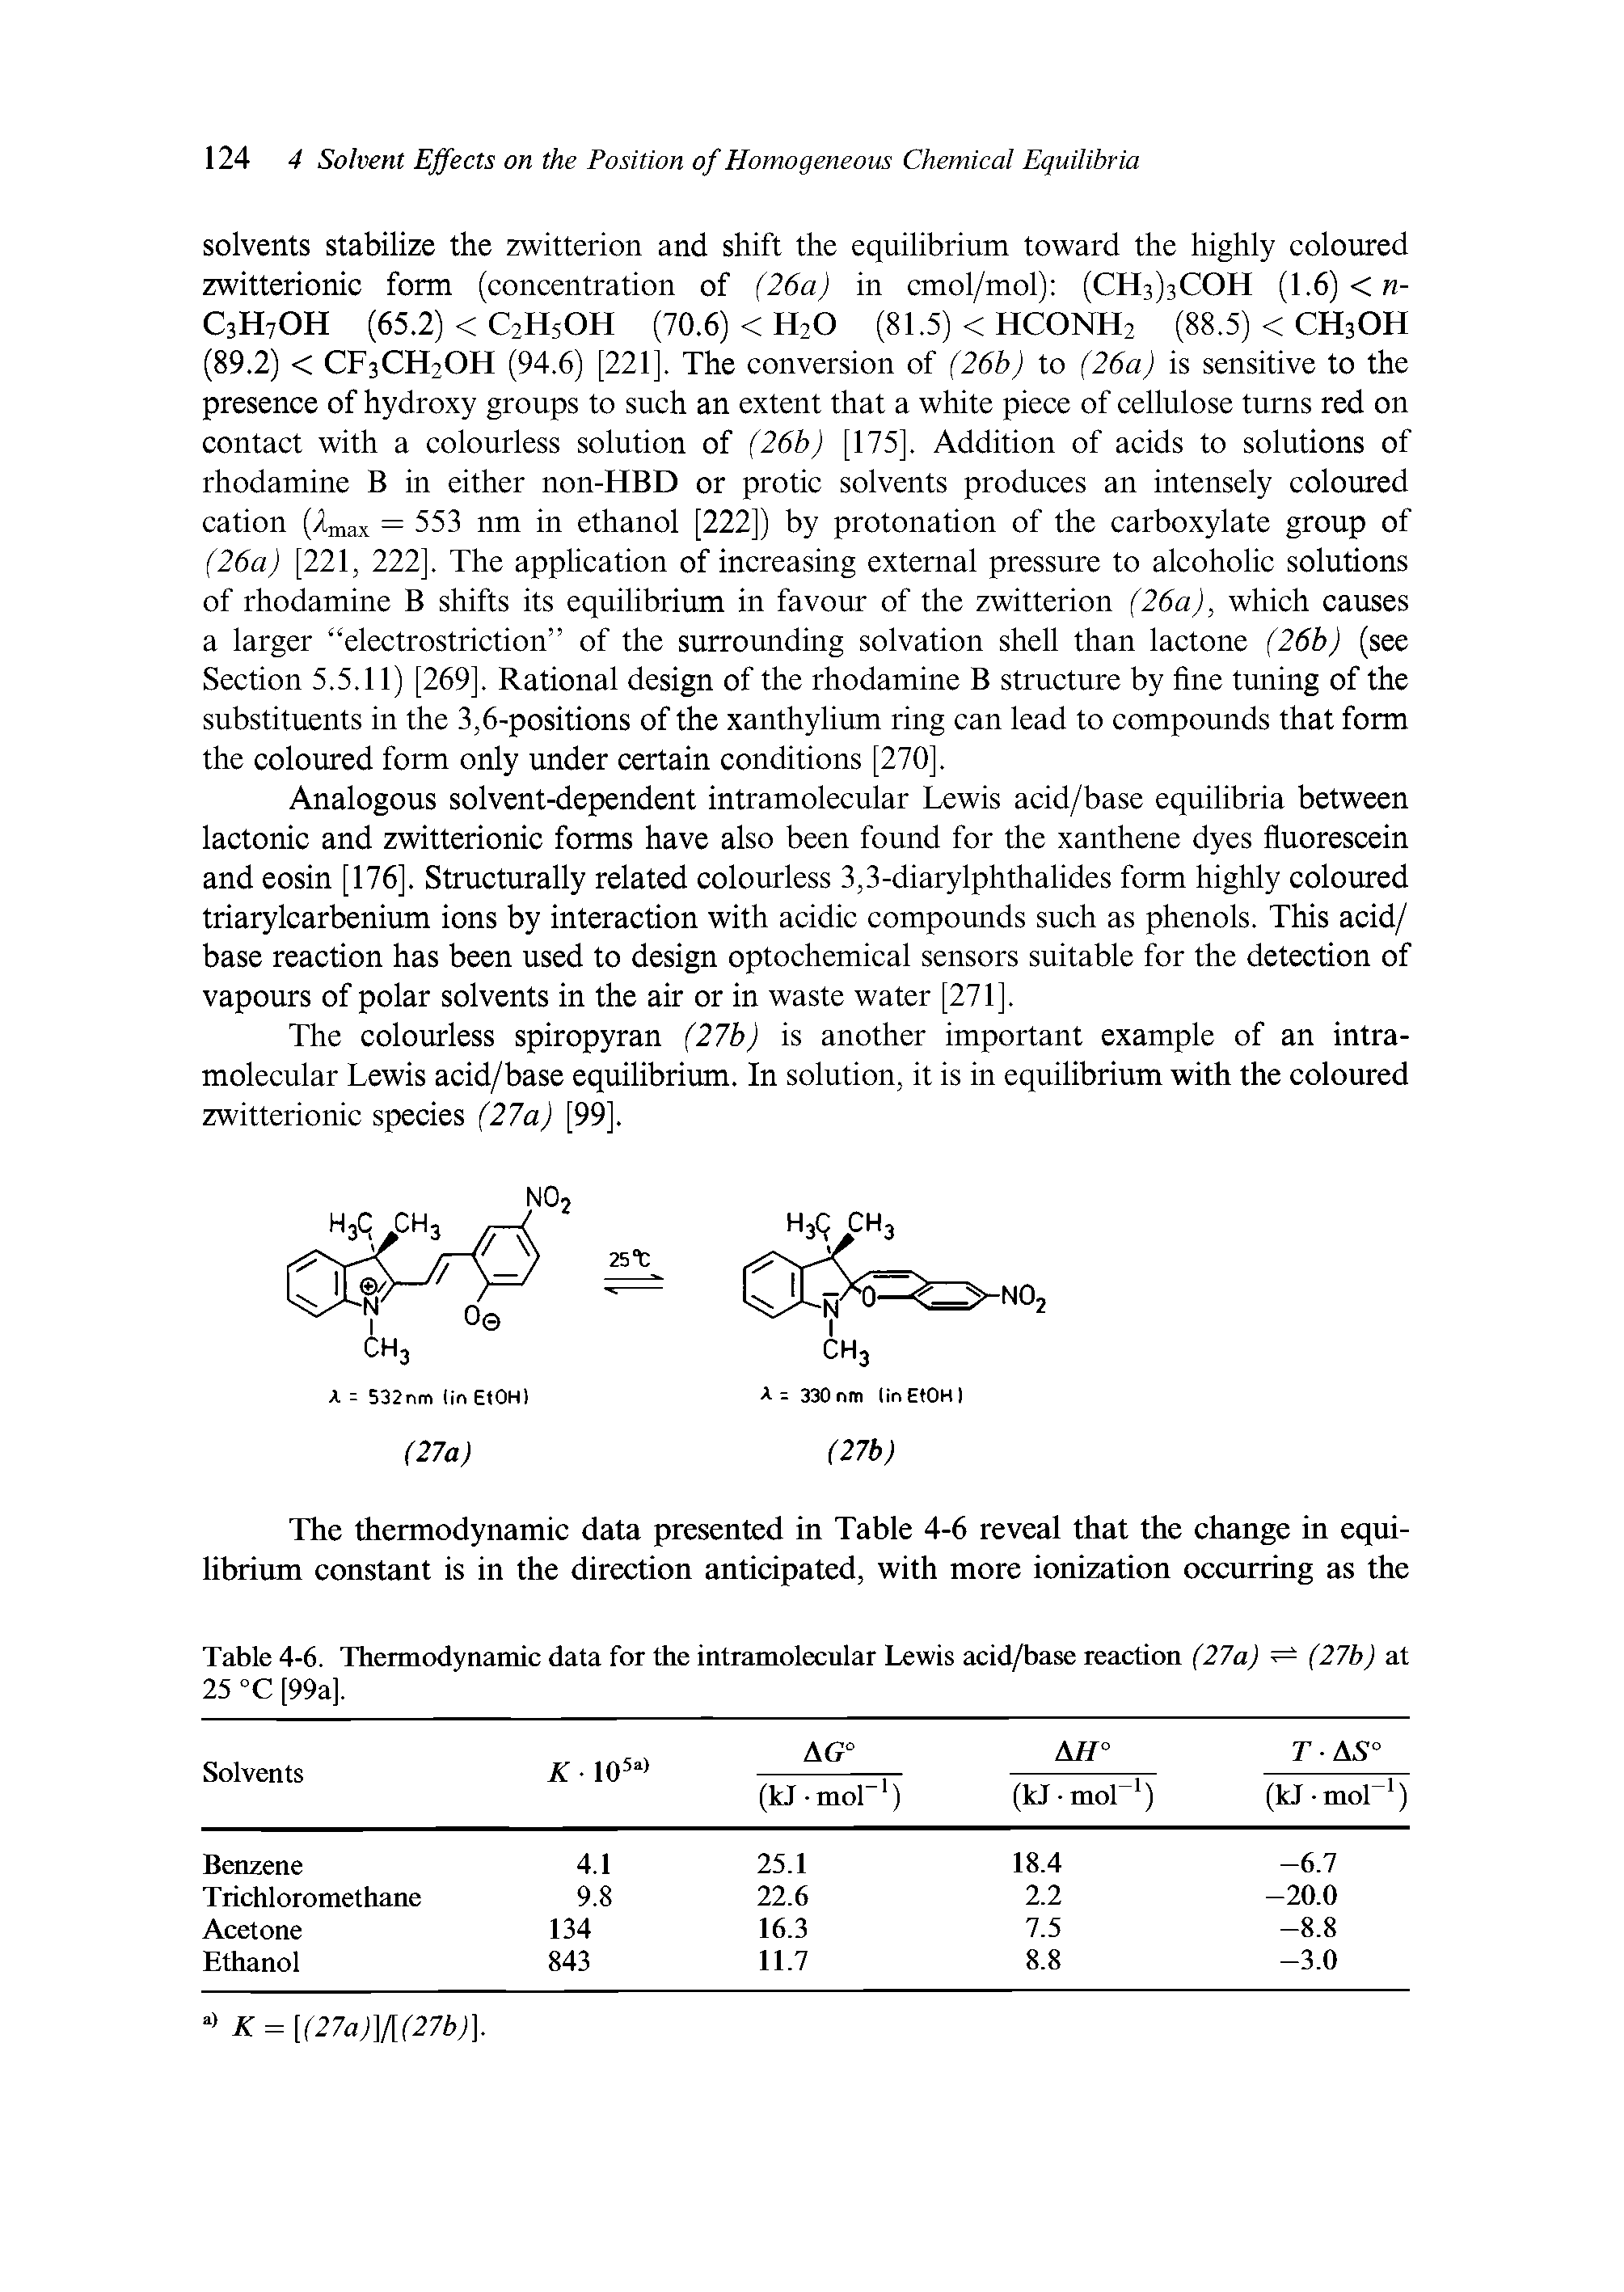 Table 4-6. Thermodynamic data for the intramolecular Lewis acid/base reaction (27a) (27b) at 25 °C [99aj.